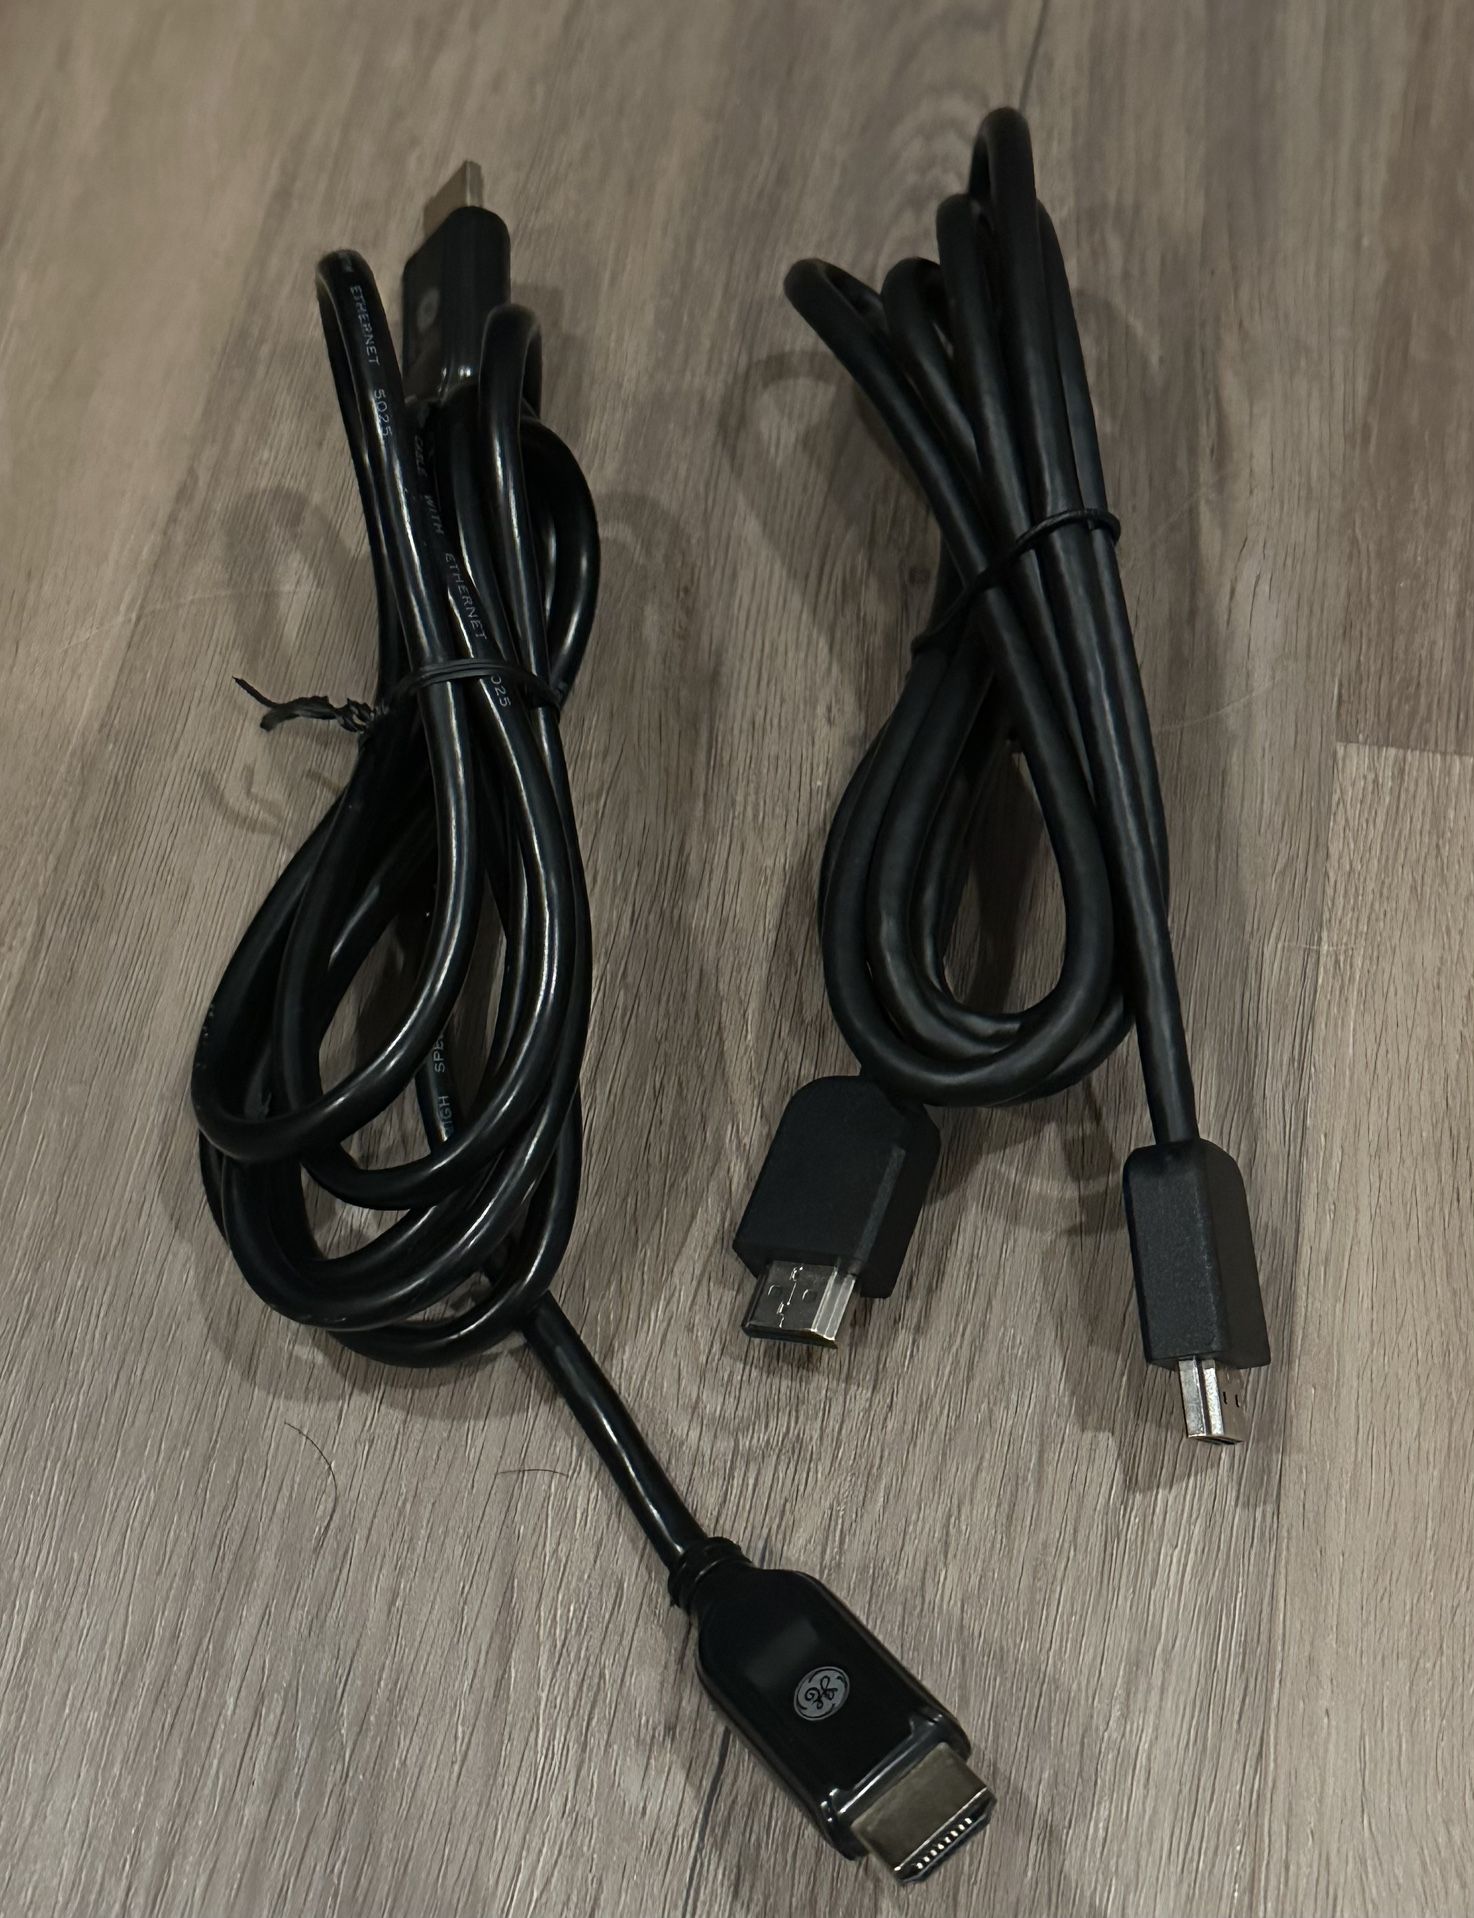 2 HDMI Cables 6’ Each